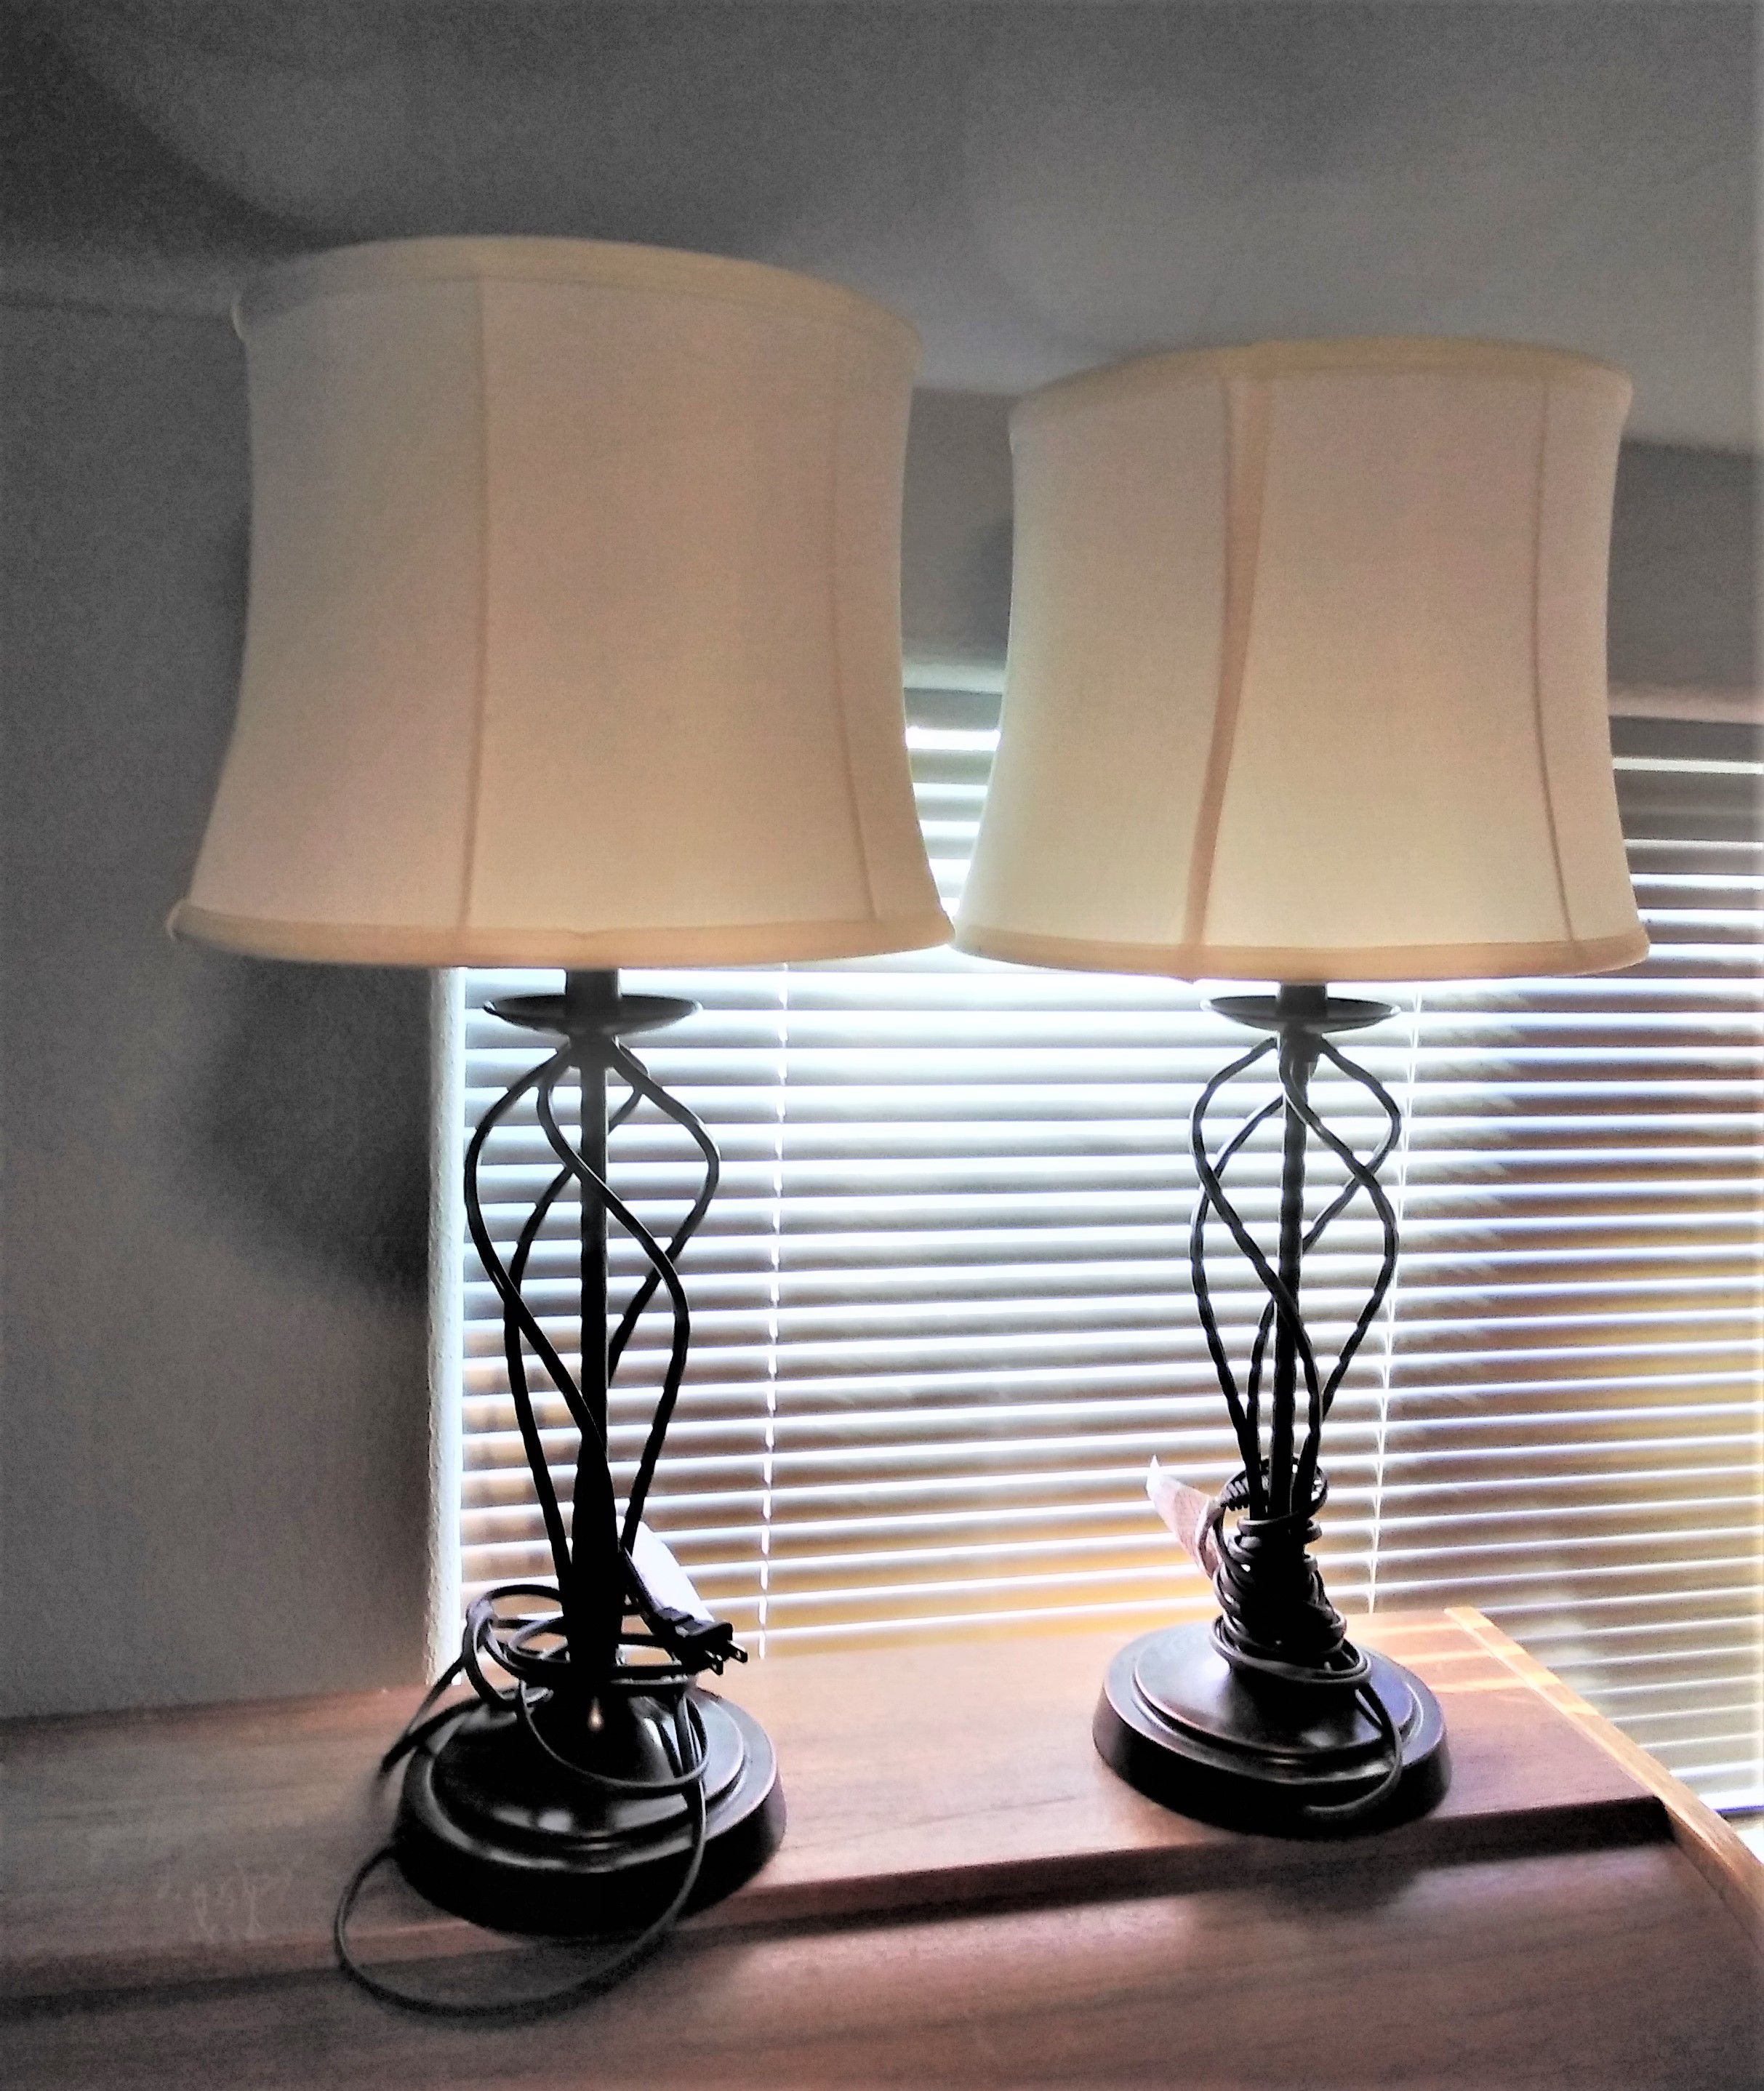 Pair of Wrought Iron Swirl Table Lamps w Shades used for Home Staging